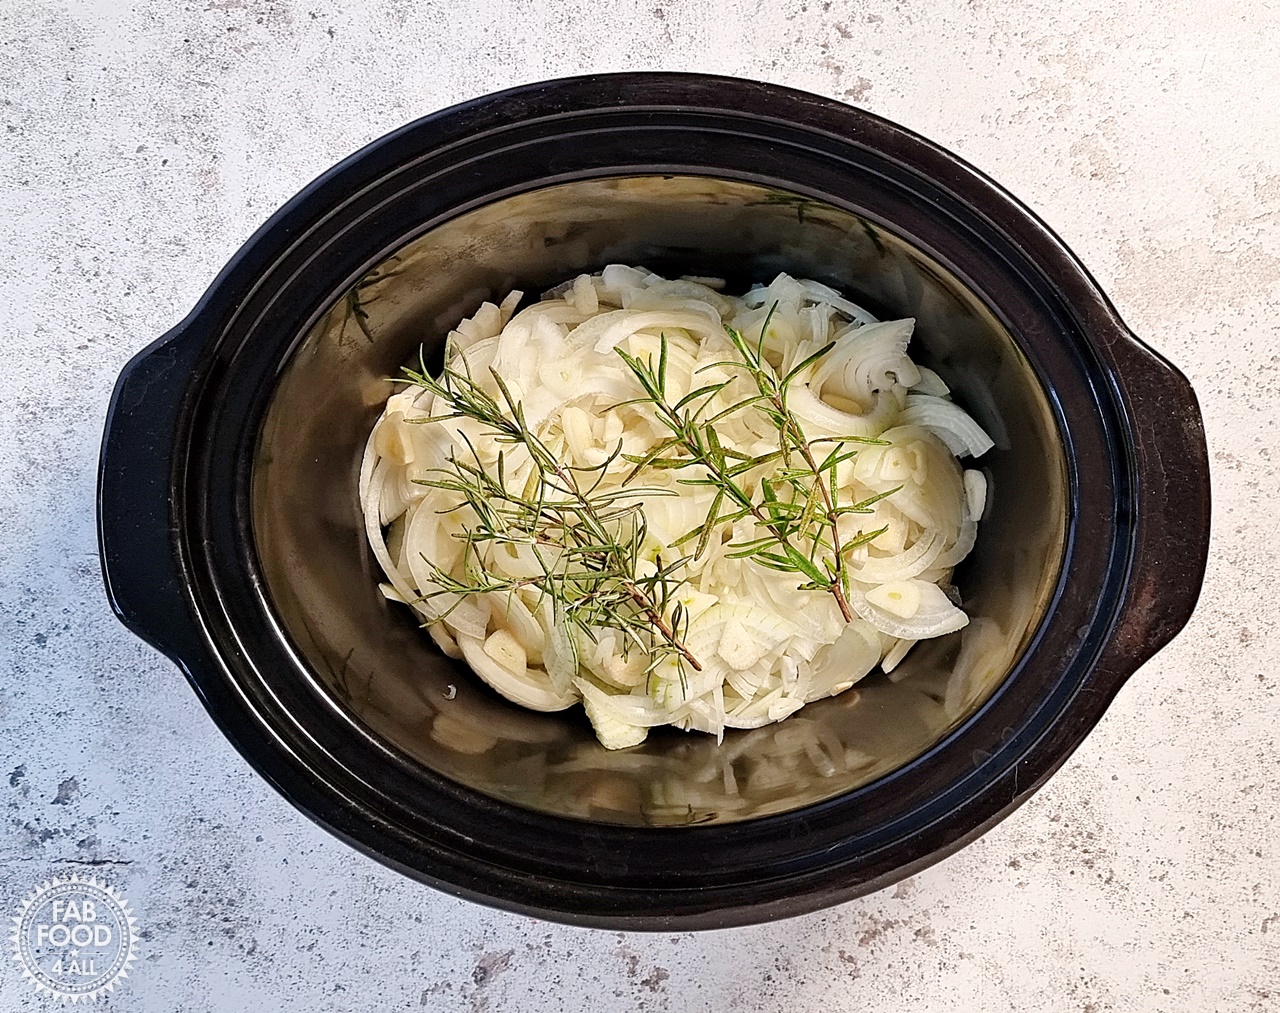 Onions, garlic & rosemary in slow cooker.